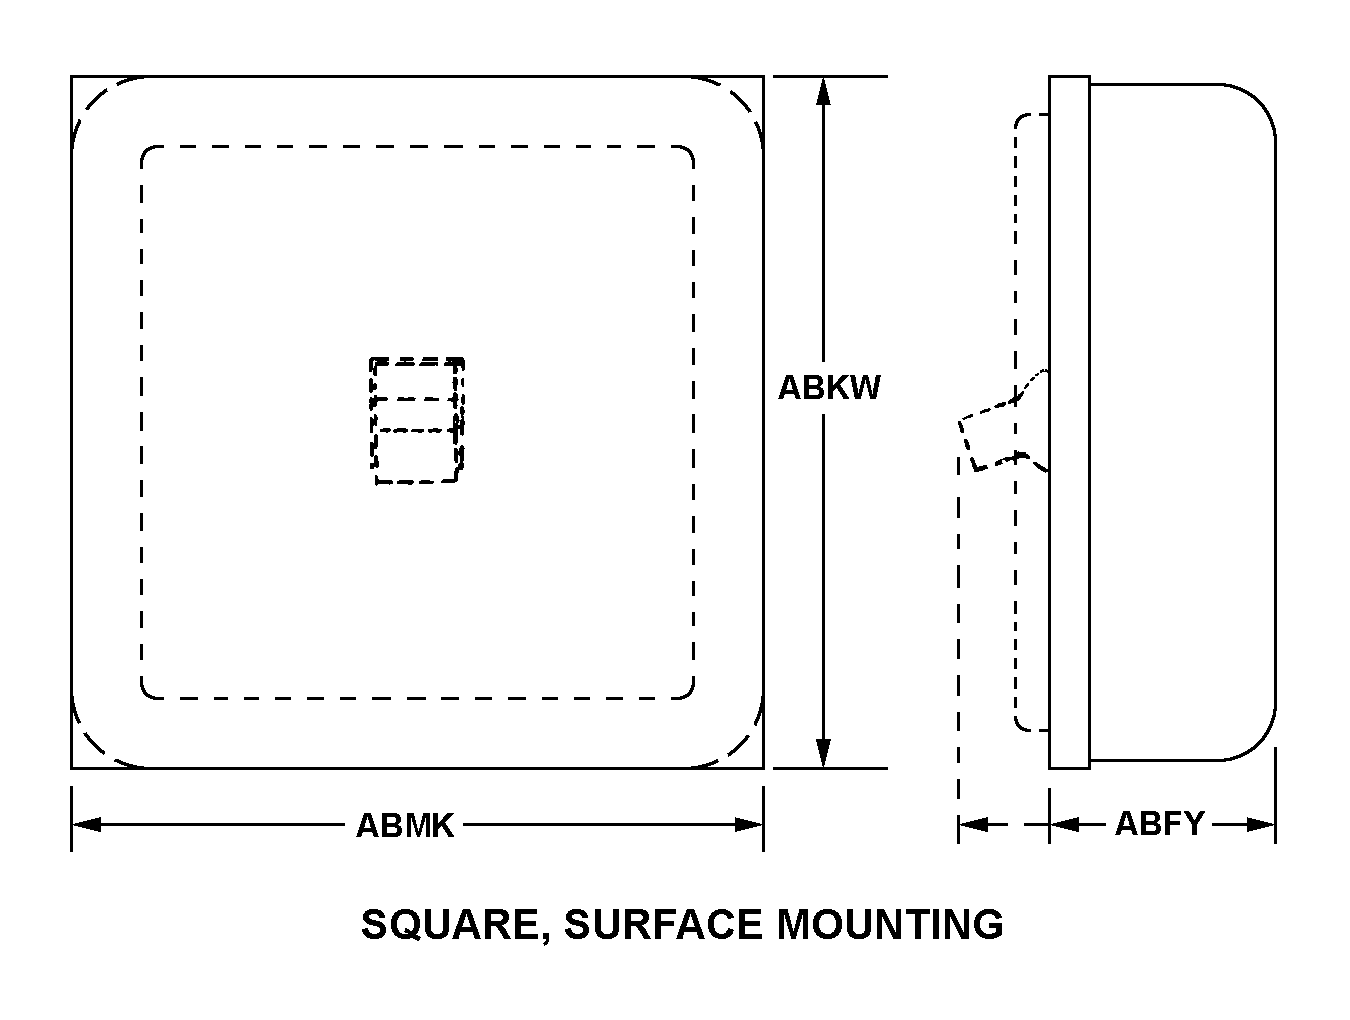 SQUARE, SURFACE MOUNTING style nsn 6110-01-325-6187